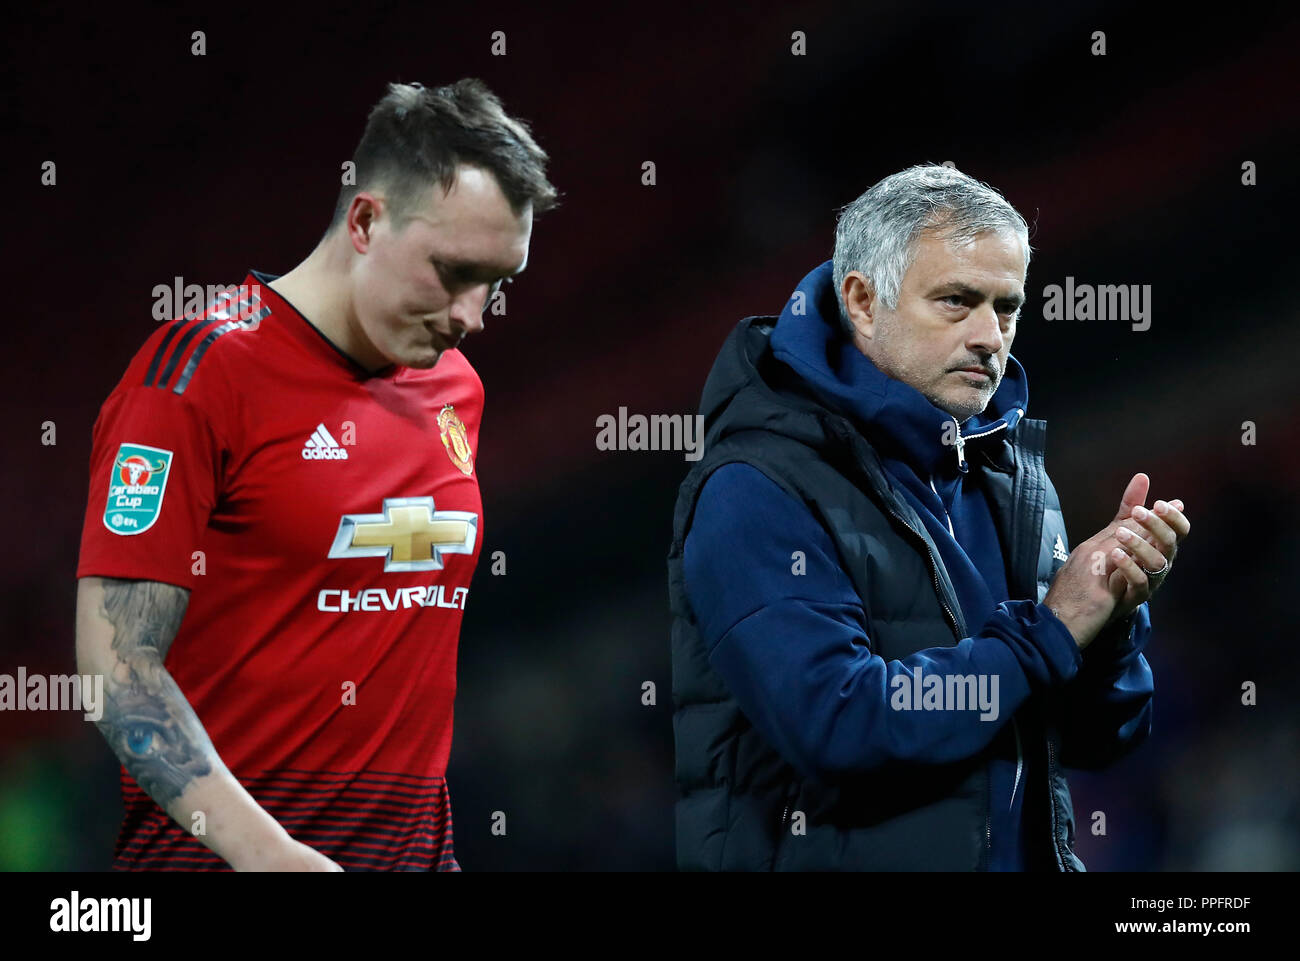 Manchester United's Phil Jones (left) and manager Jose Mourinho (right) appears dejected after the penalty shootout during the Carabao Cup, third round match at Old Trafford, Manchester. PRESS ASSOCIATION Photo. Picture date: Tuesday September 25, 2018. See PA story SOCCER Man Utd. Photo credit should read: Martin Rickett/PA Wire. RESTRICTIONS: EDITORIAL USE ONLY No use with unauthorised audio, video, data, fixture lists, club/league logos or 'live' services. Online in-match use limited to 120 images, no video emulation. No use in betting, games or single club/league/player publications Stock Photo